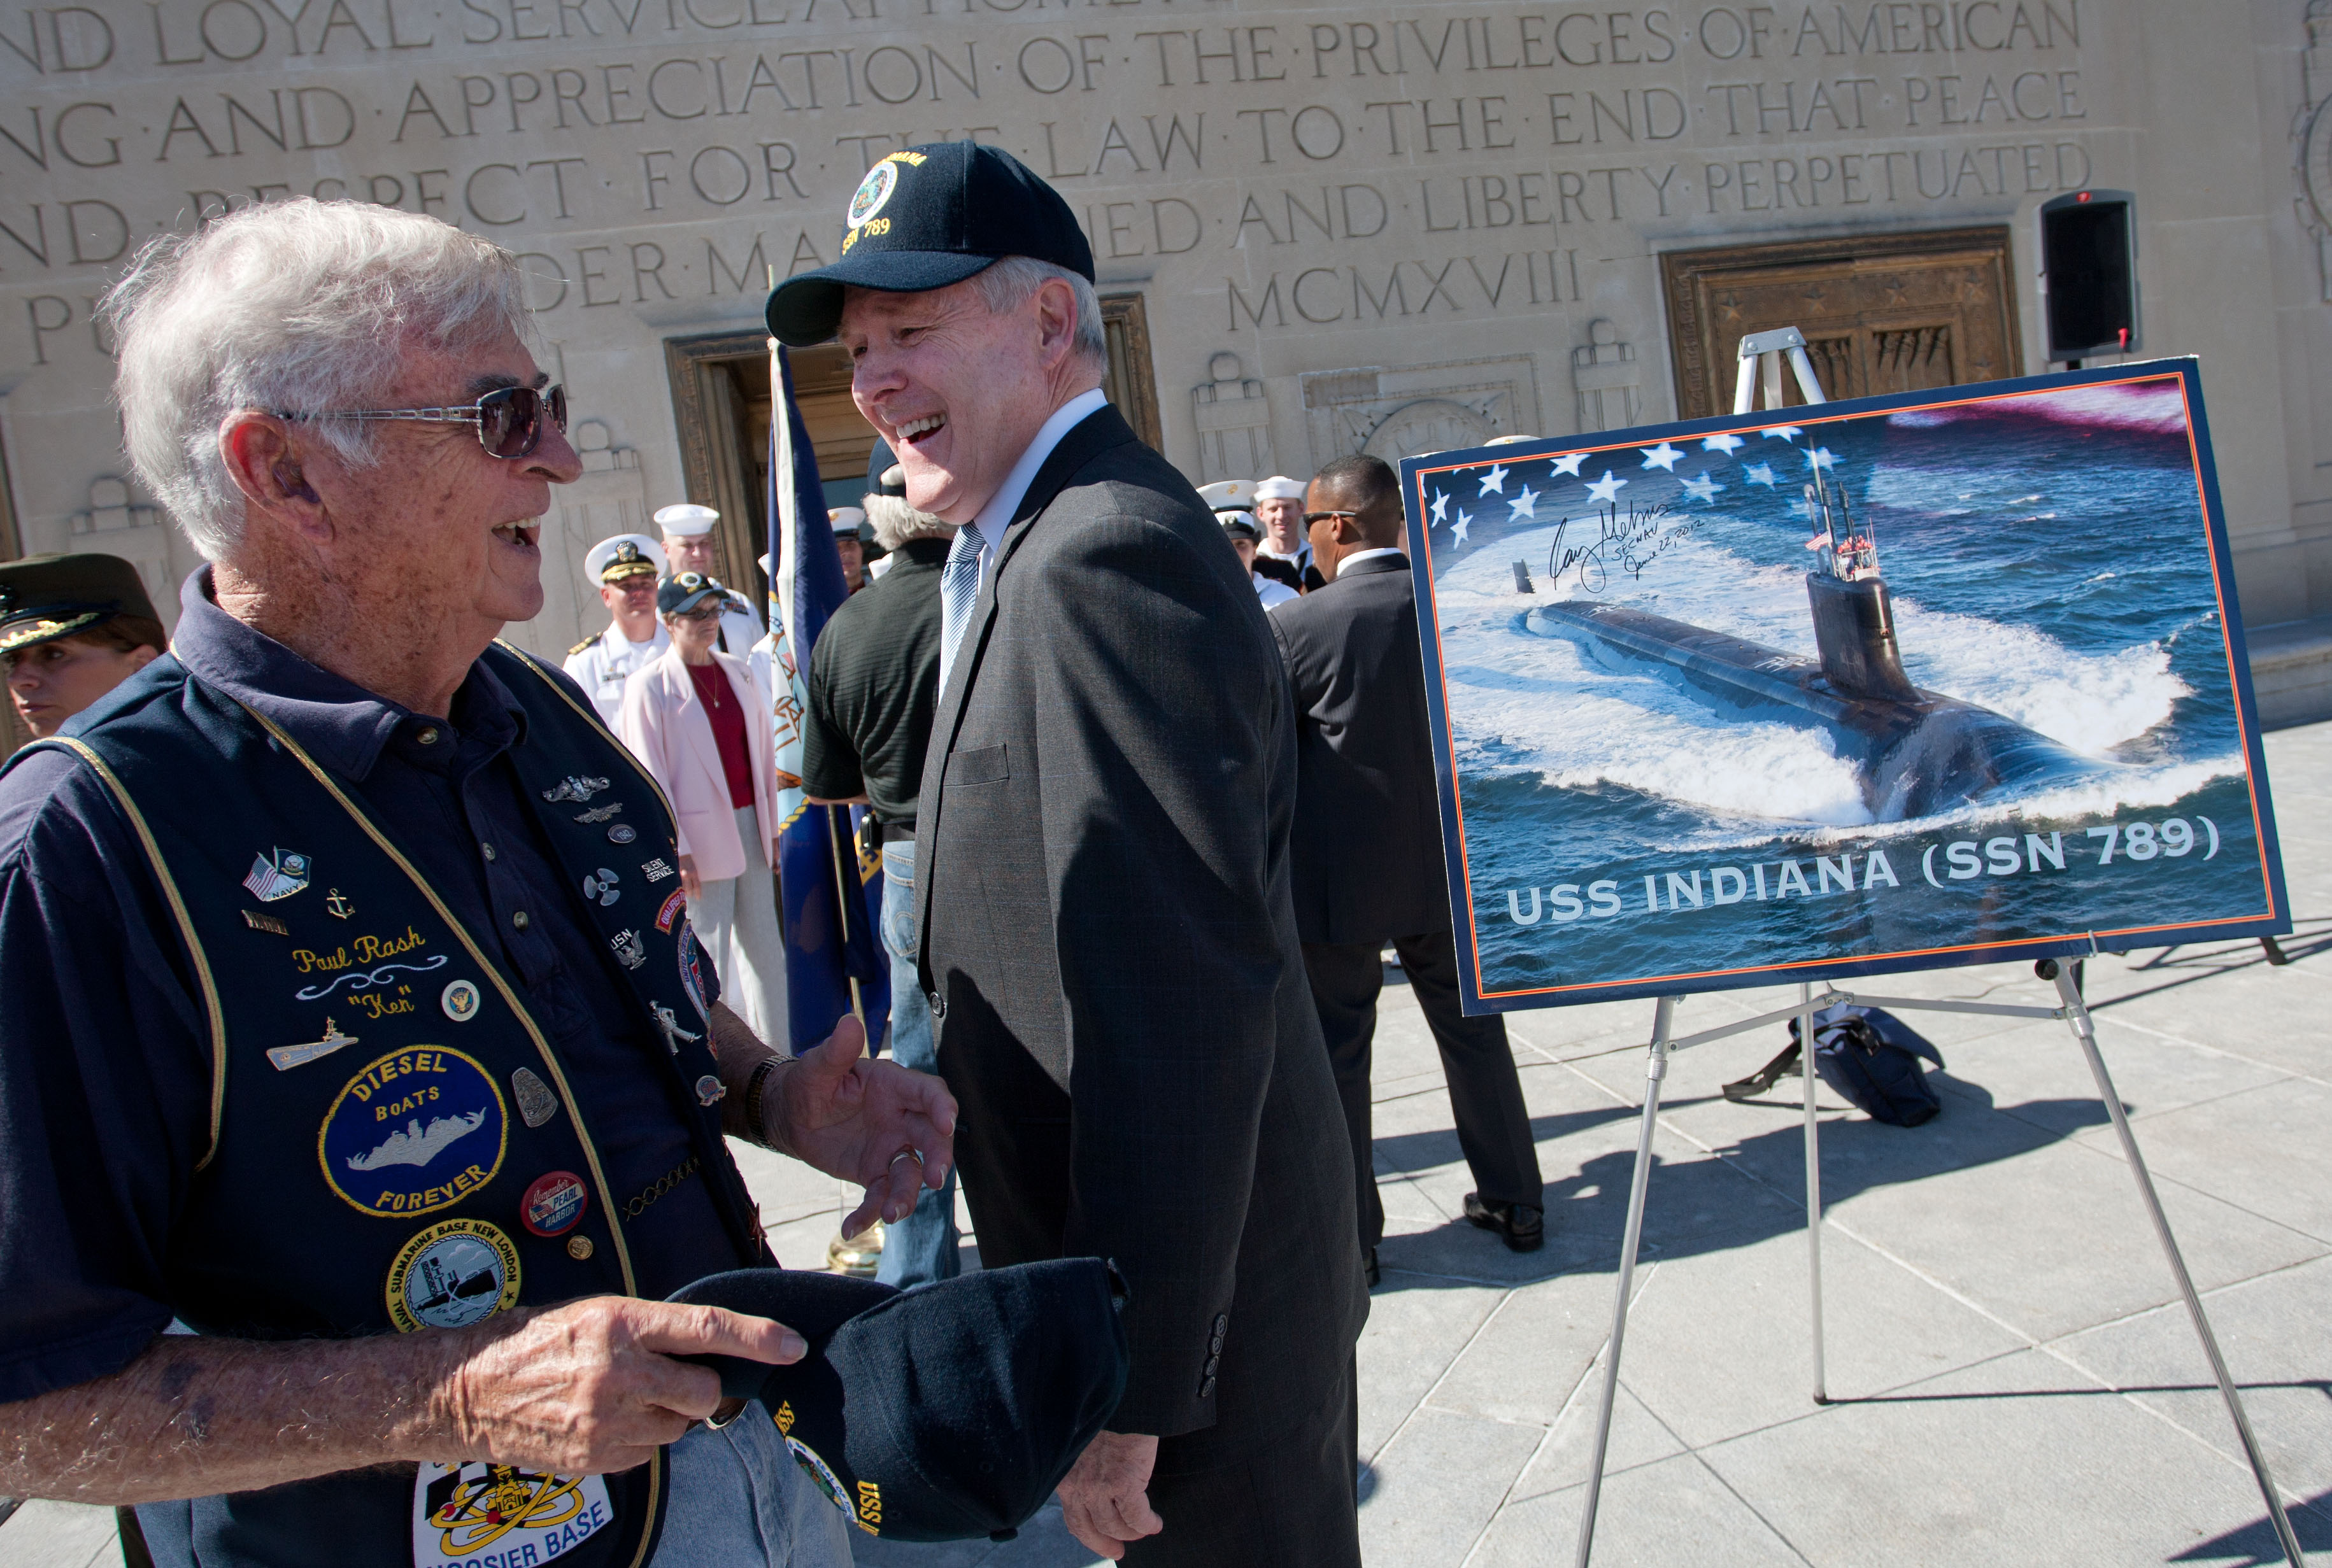 Secretary of the Navy (SECNAV) the Honorable Ray Mabus, right, speaks with WWII submarine veteran Paul Rash, 88, after a ceremony celebrating the naming of the Virginia-class submarine, USS Indiana (SSN 789), at the Indianapolis War Memorial. Rash joined the Navy on Dec. 4, 1941 and served aboard USS Plunger (SS 179) and USS Barbero (SS 317).